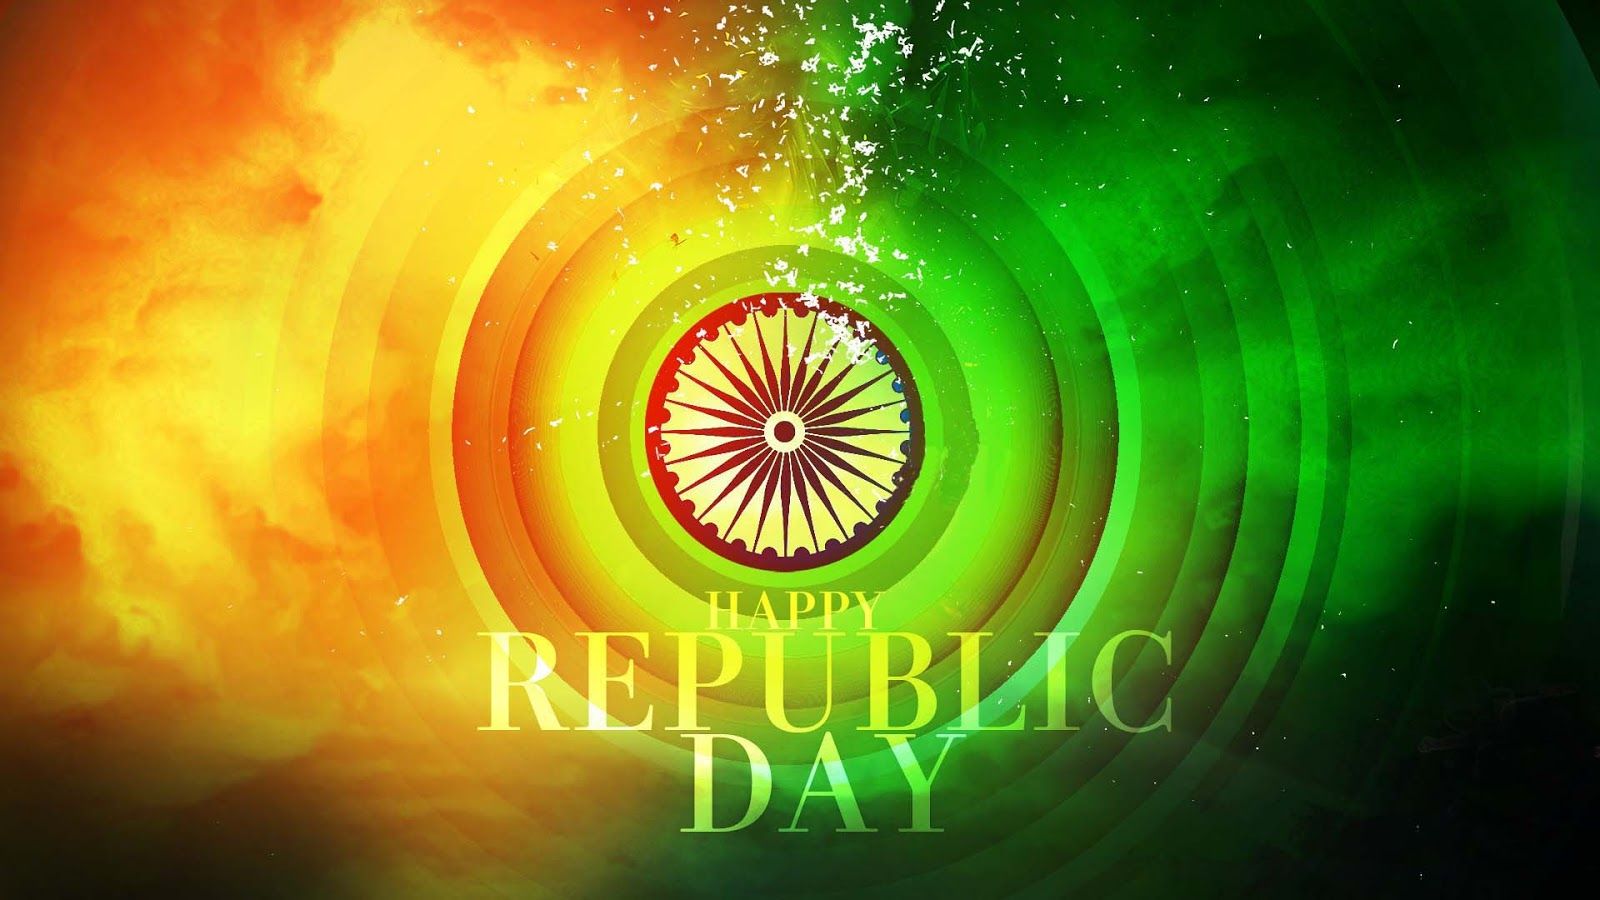 Republic Day 2021 Image. Happy Republic Day 2021 Image, Sms, Quotes, Wishes, Wallpaper, Shayri, Messages